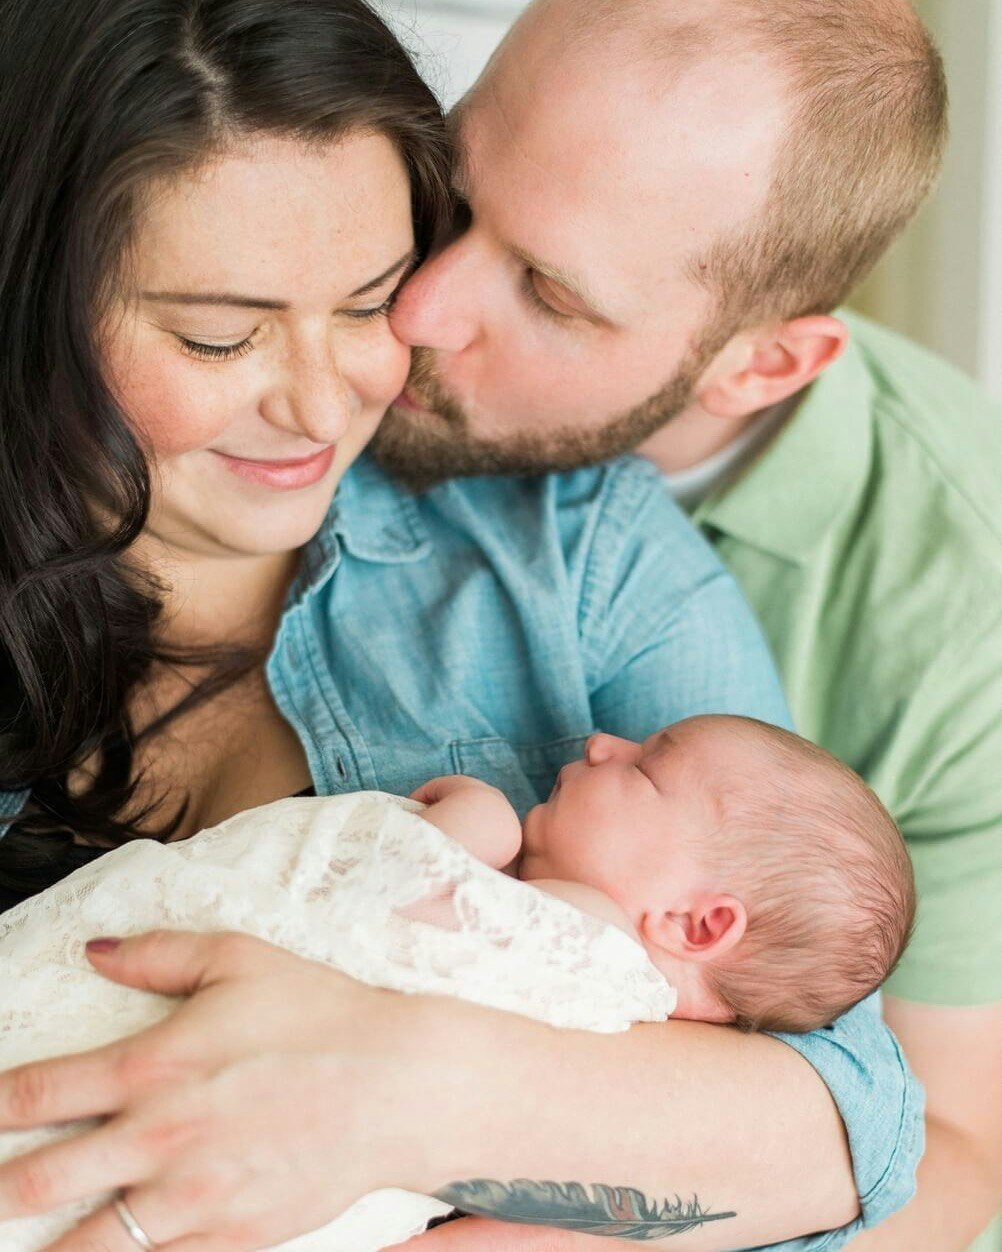 A sweet little captured moment between these two new parents. What a blessing this little baby girl is.